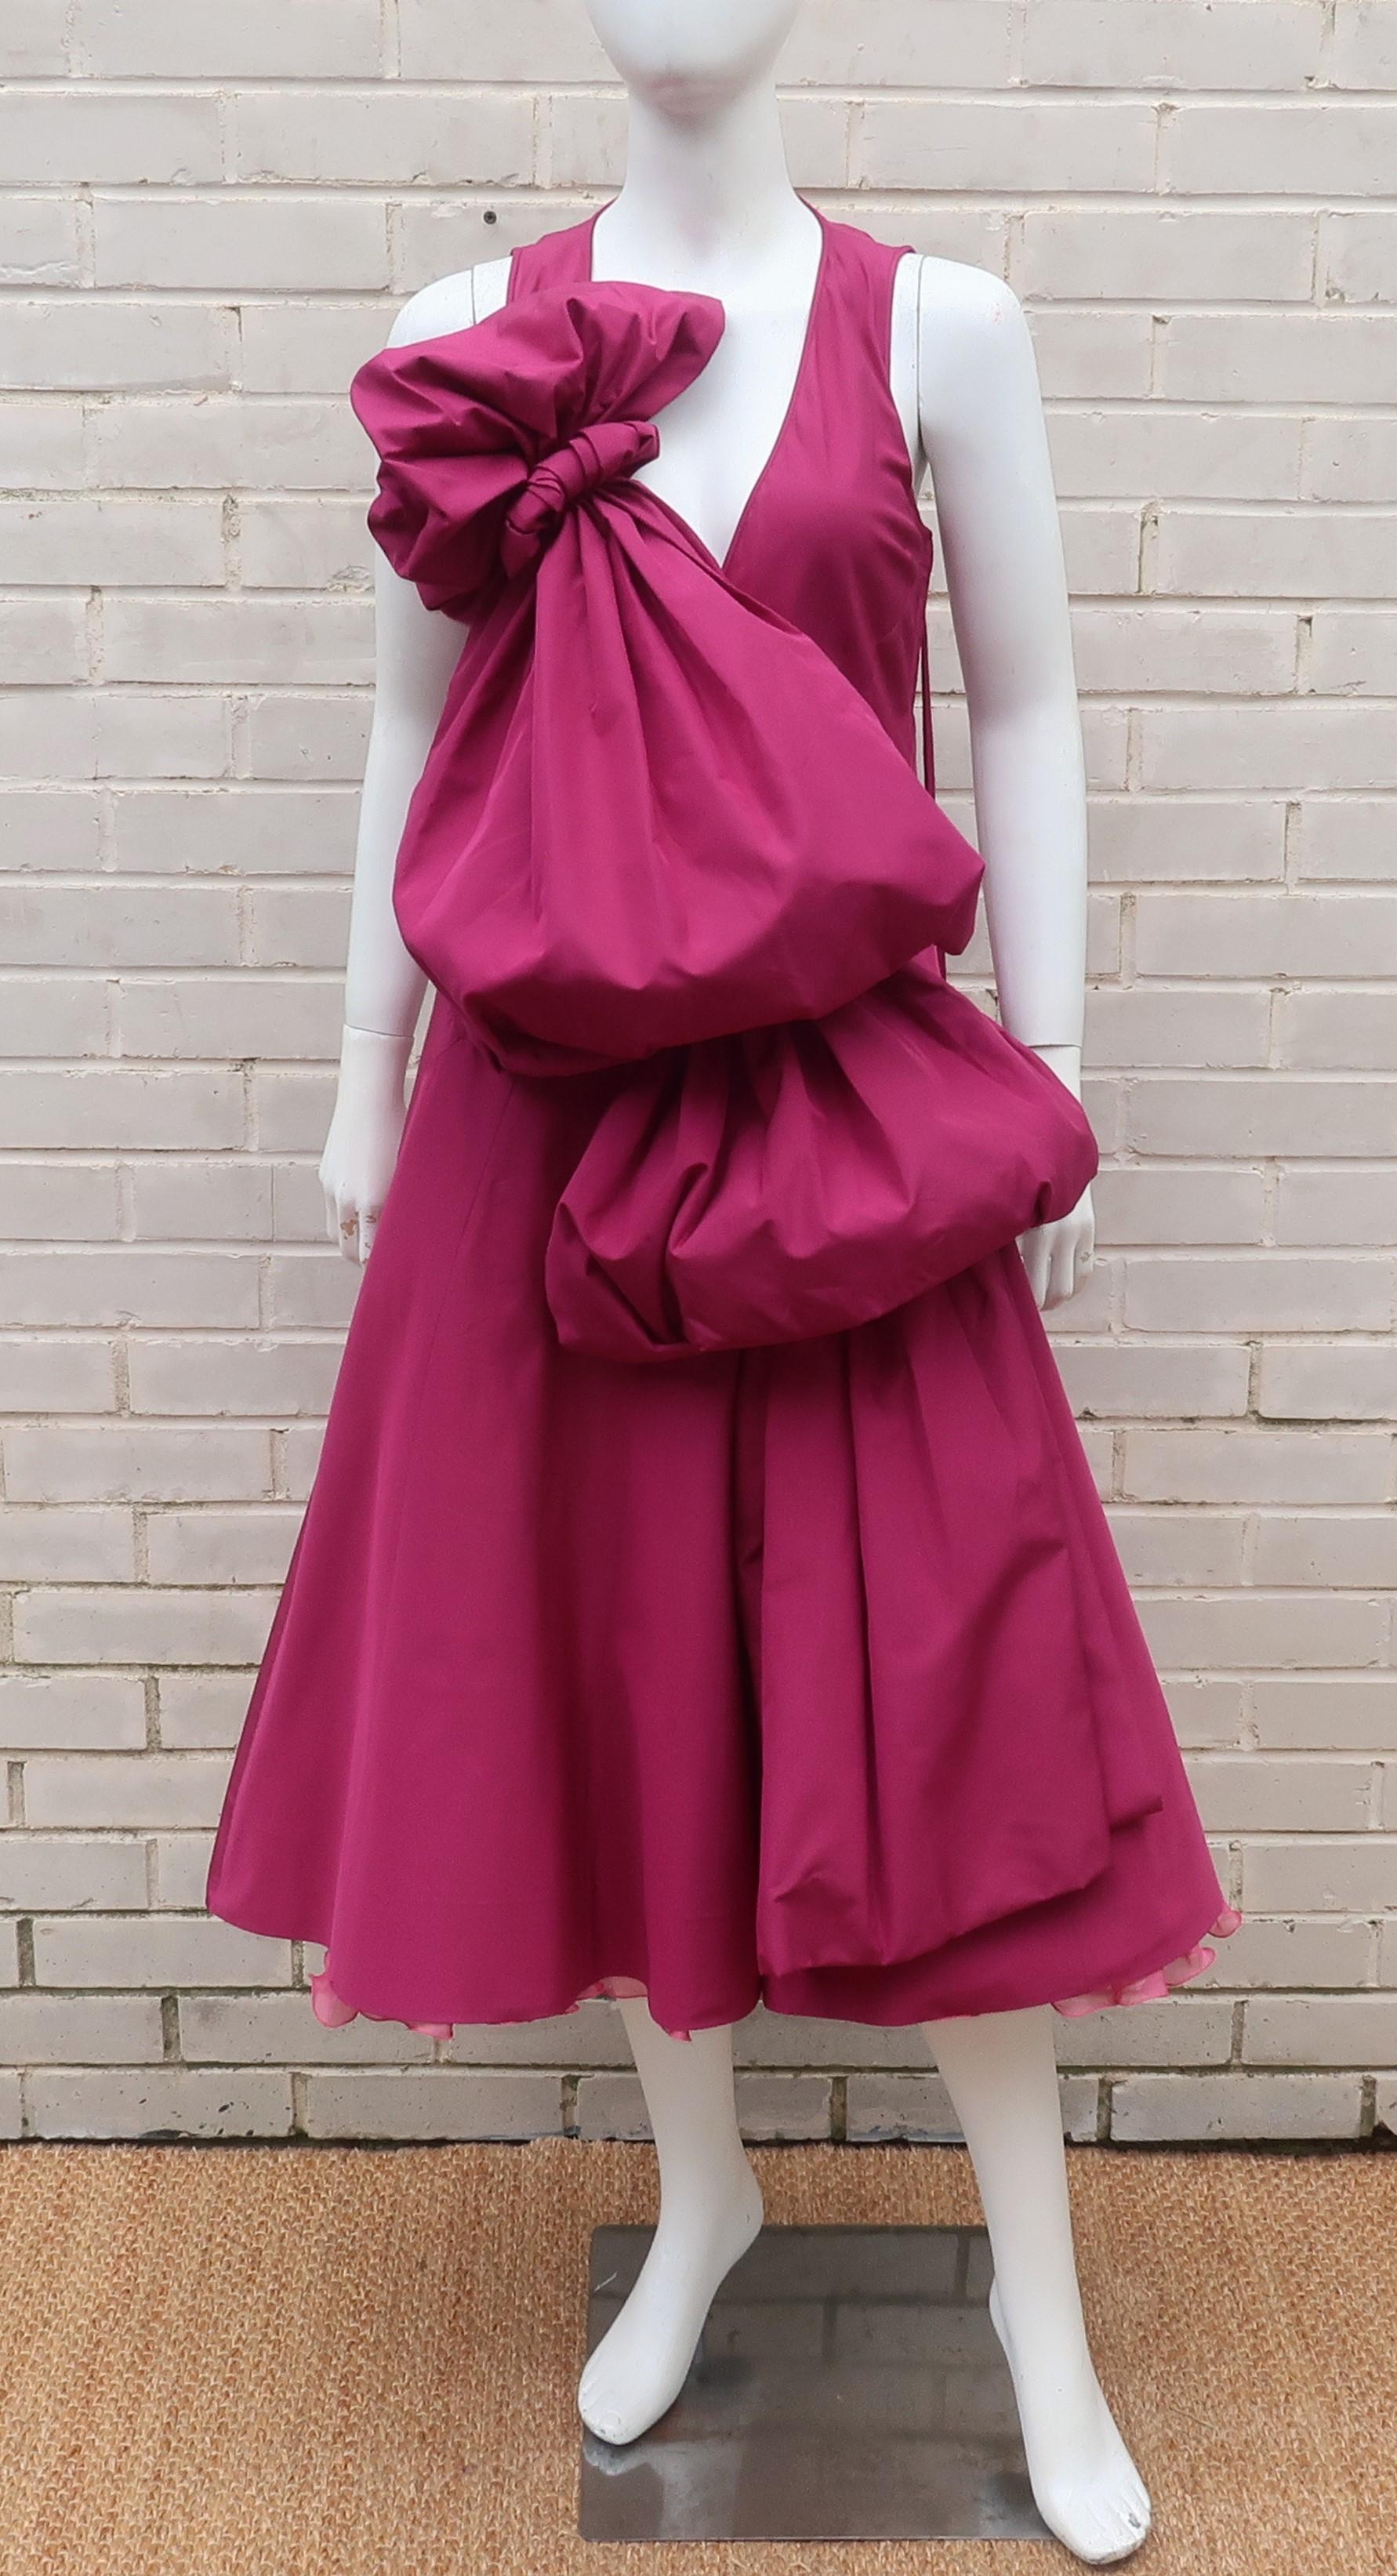 Marc Jacobs dark magenta silk taffeta dress with a built-in ruffled organza crinoline and a cascading drape with pouf.  The dress zips at the side with an exaggerated long grosgrain pull.  The front drape is shaped with hidden netting and the